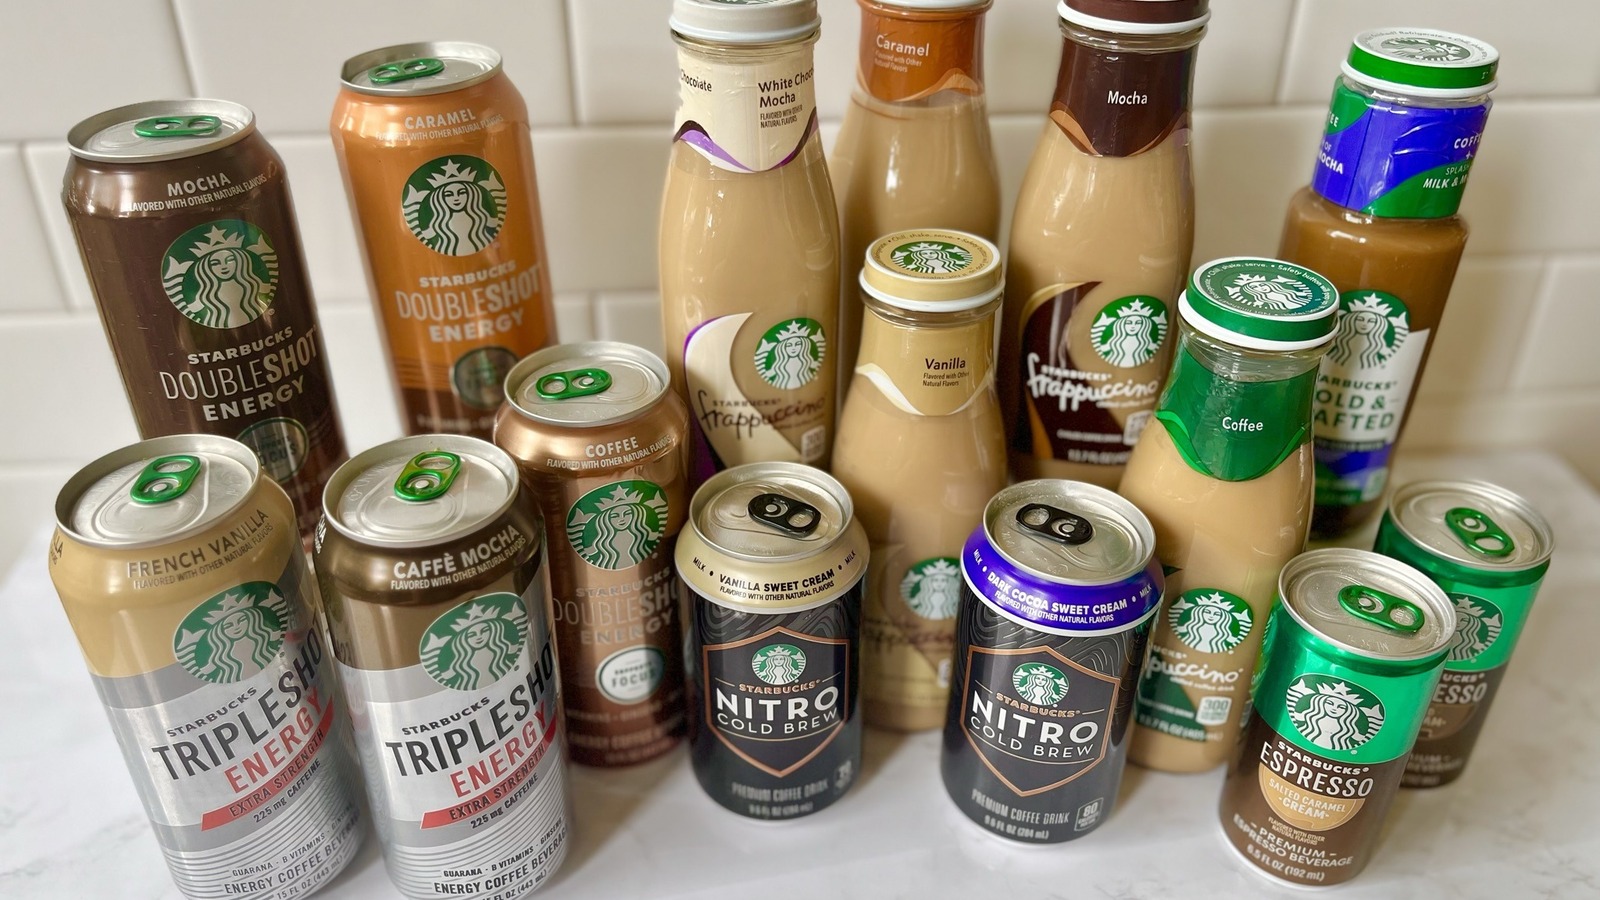 https://www.tastingtable.com/img/gallery/15-bottled-and-canned-starbucks-coffees-ranked/l-intro-1688405613.jpg